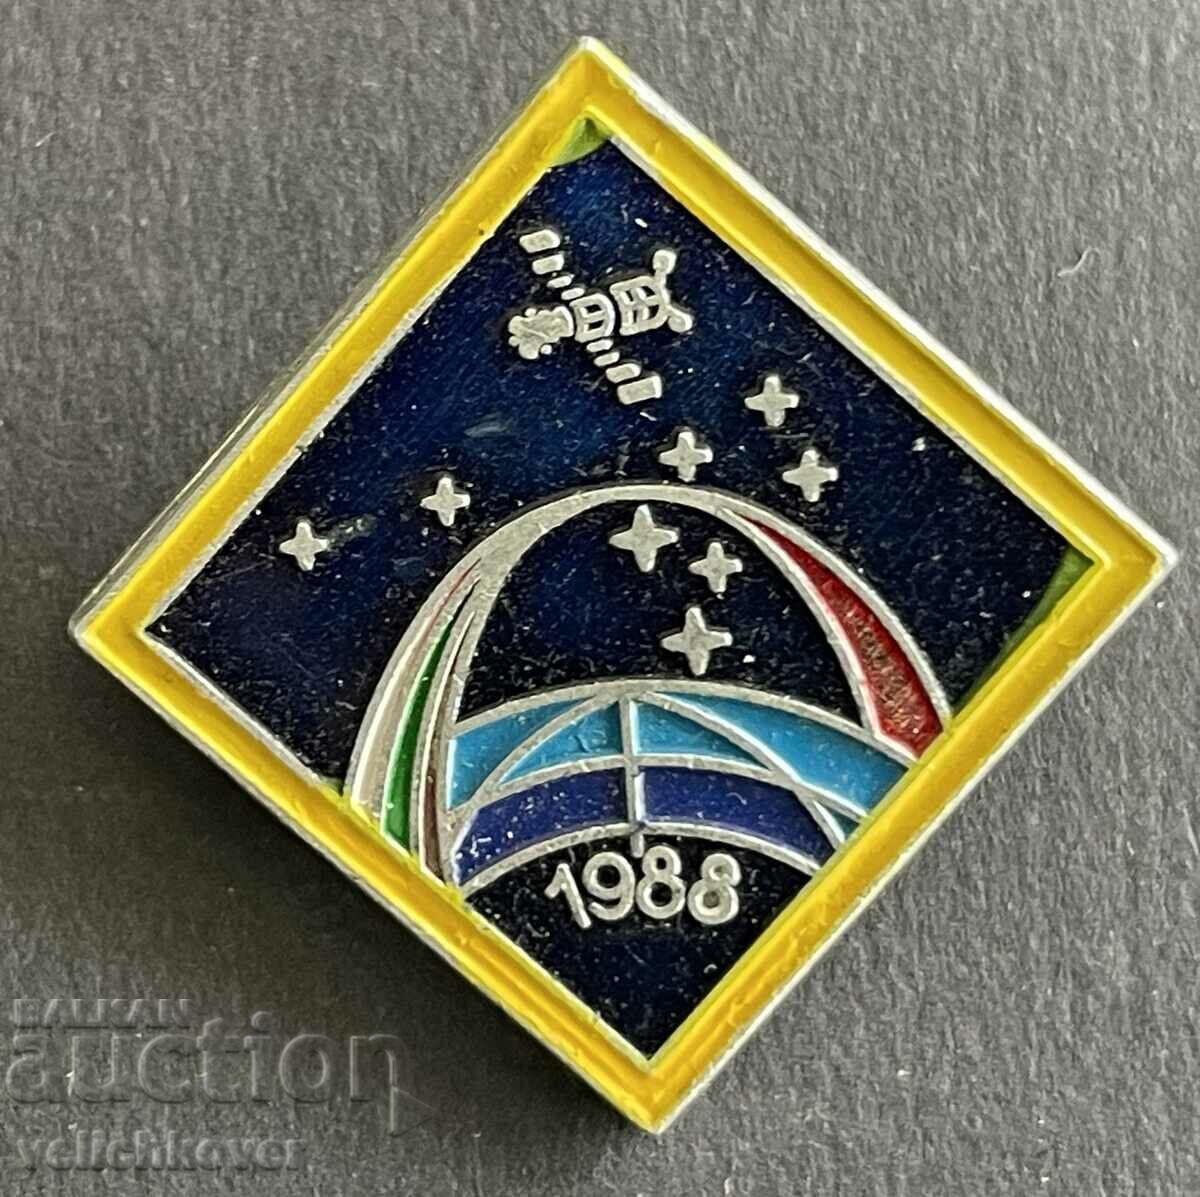 37331 Bulgaria USSR sign second joint space flight In